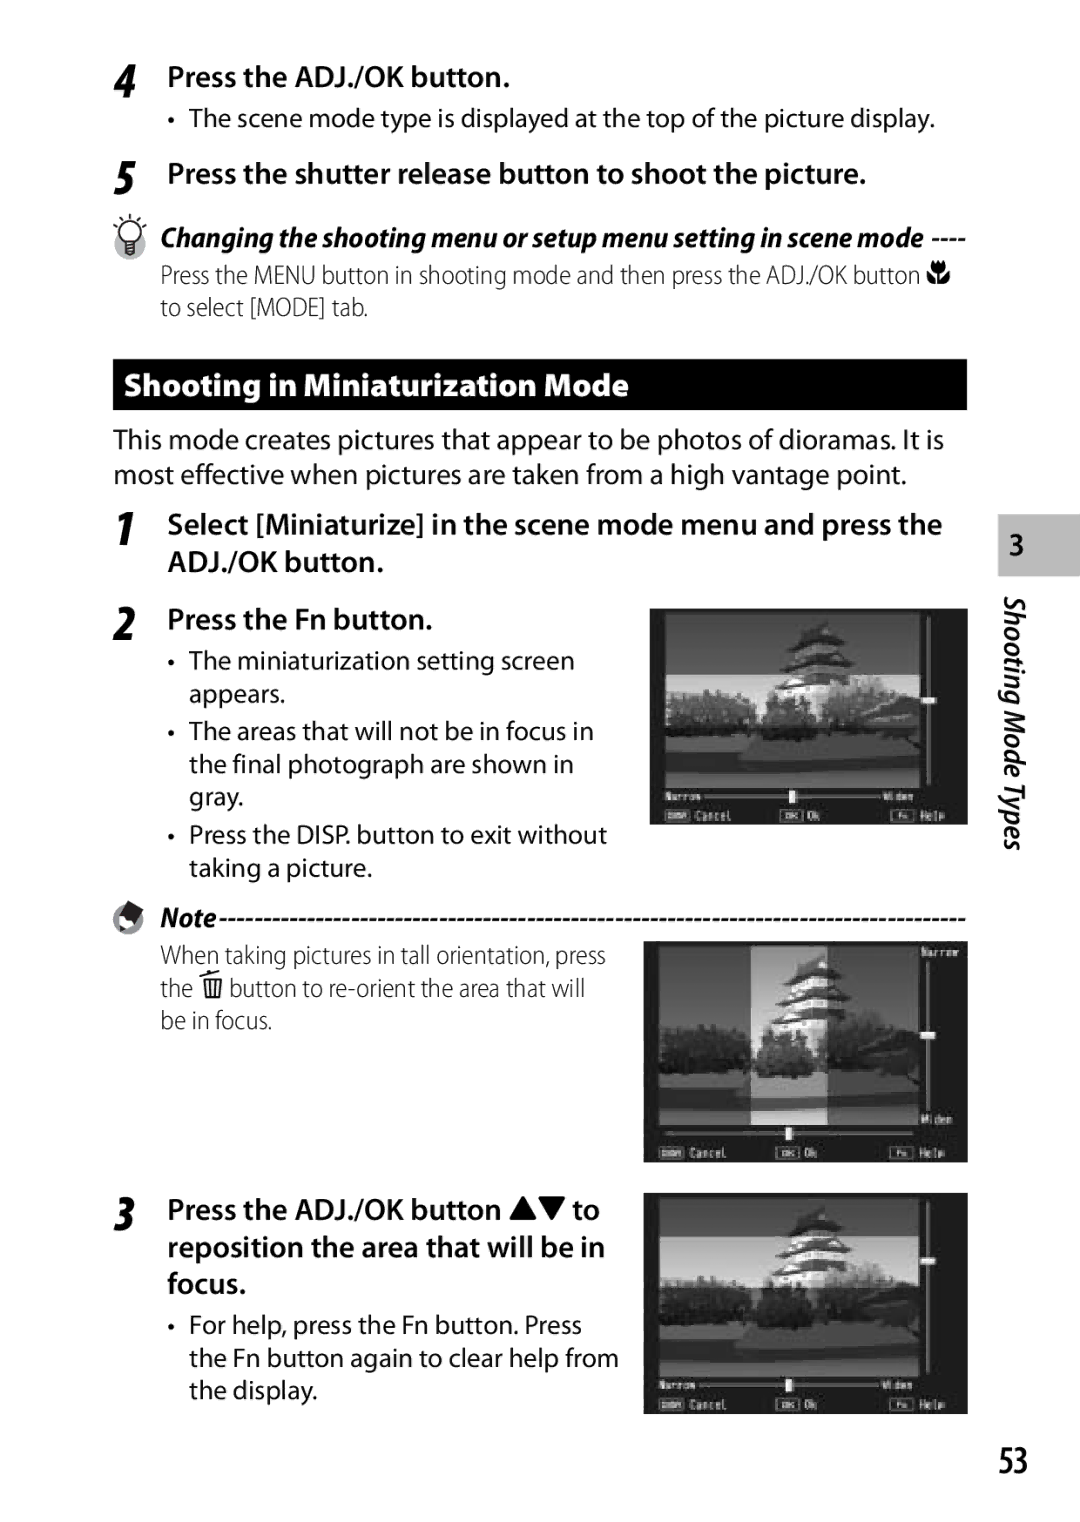 Ricoh CX3 manual Shooting in Miniaturization Mode, Press the shutter release button to shoot the picture 